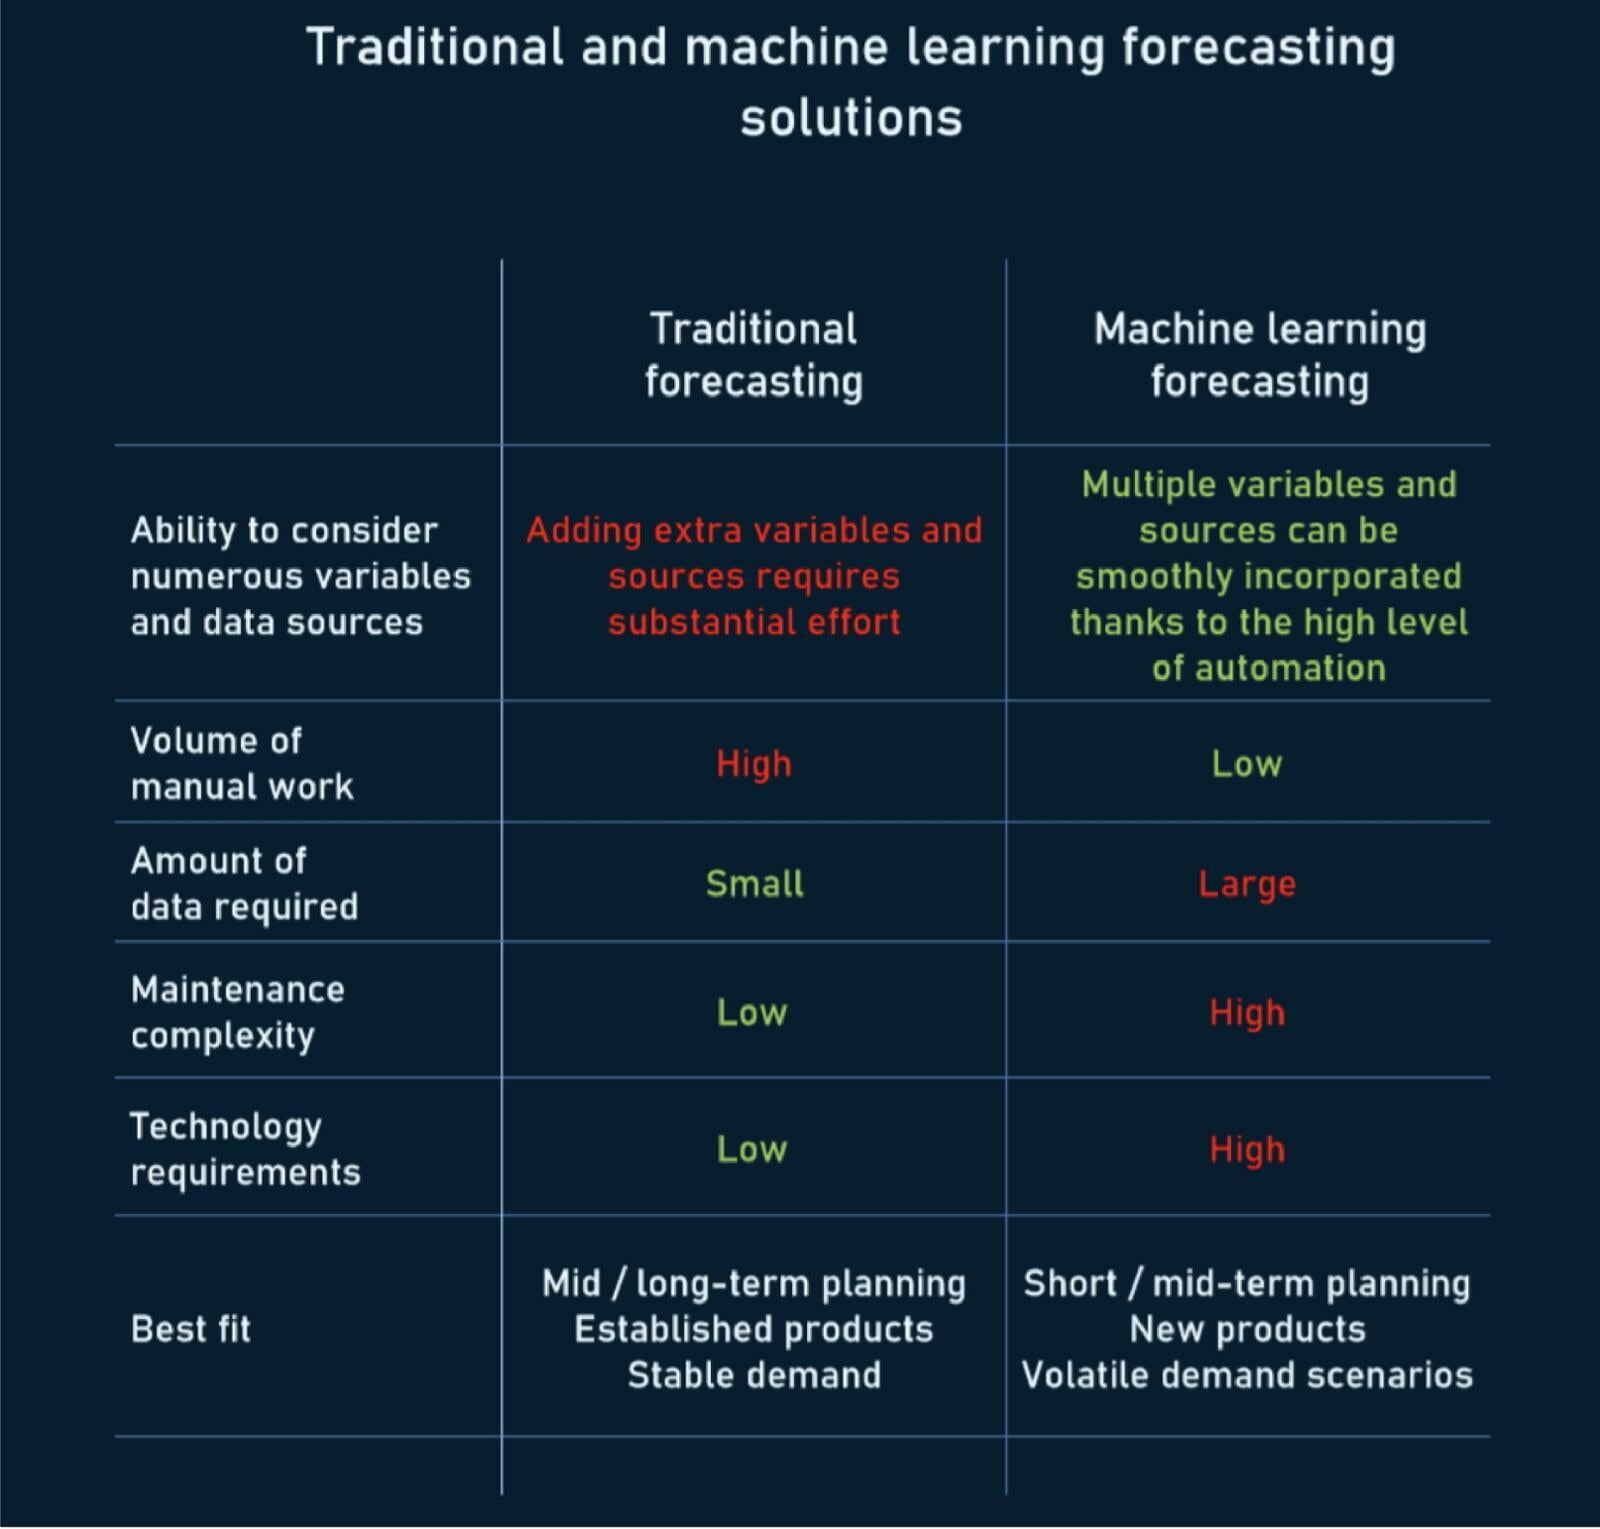 Char comparison of traditional and machine learning forecasting solutions